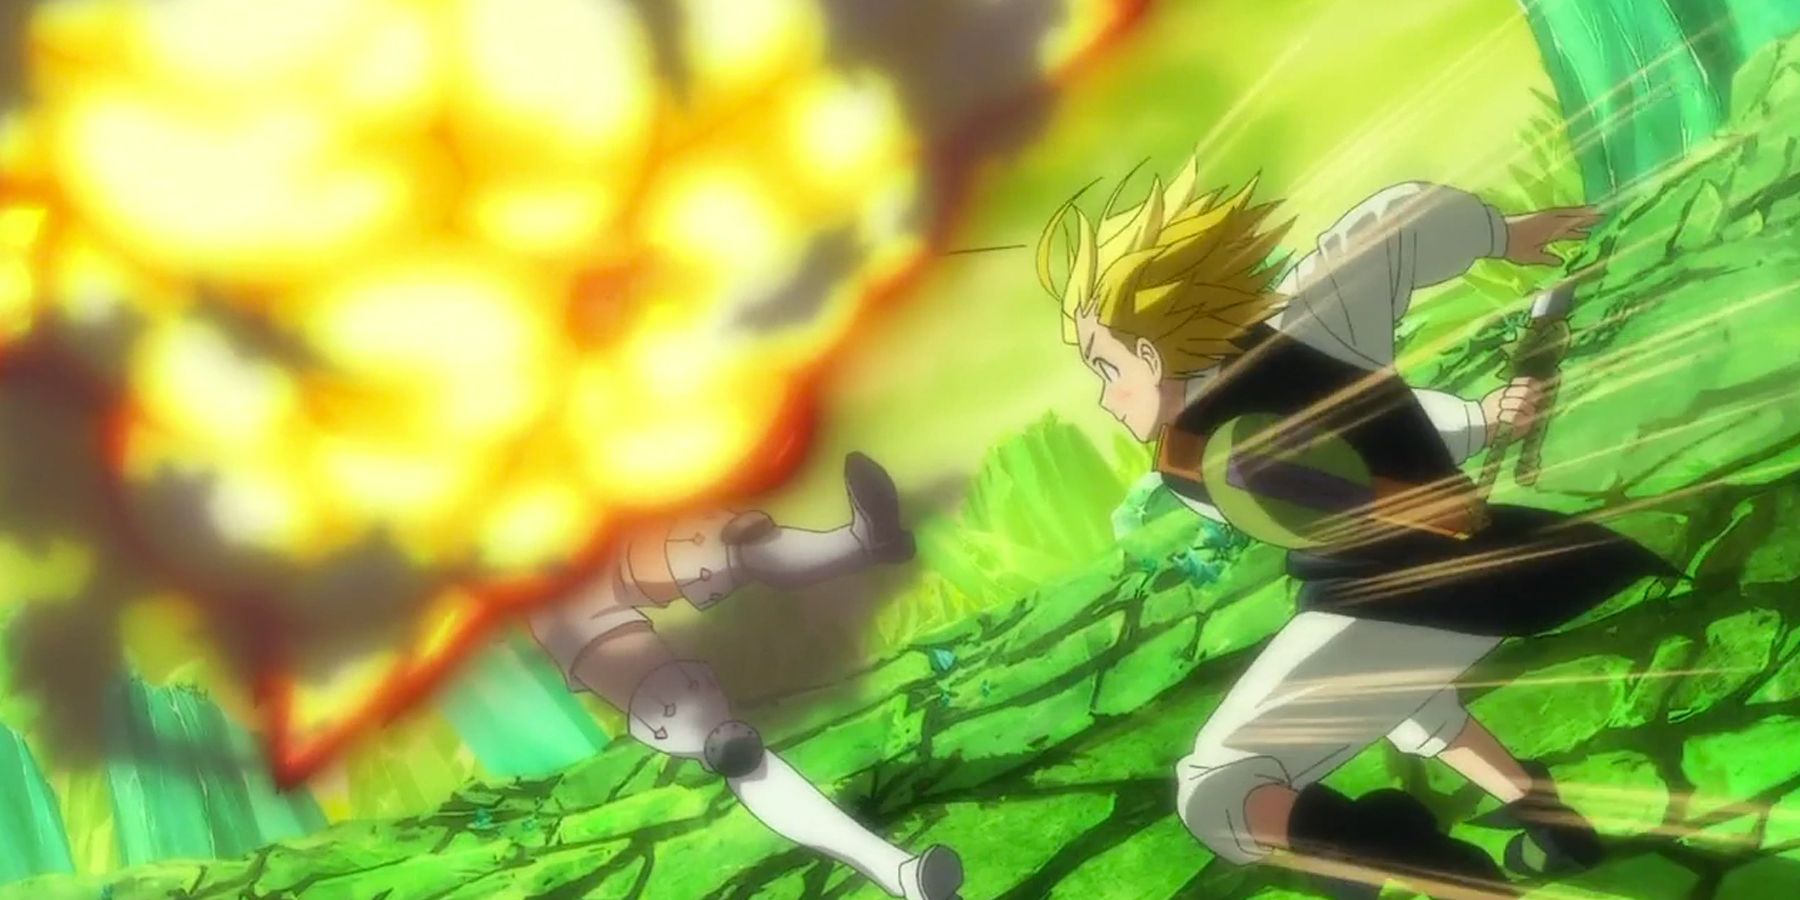 Meliodas using Full Counter in The Seven Deadly Sins.